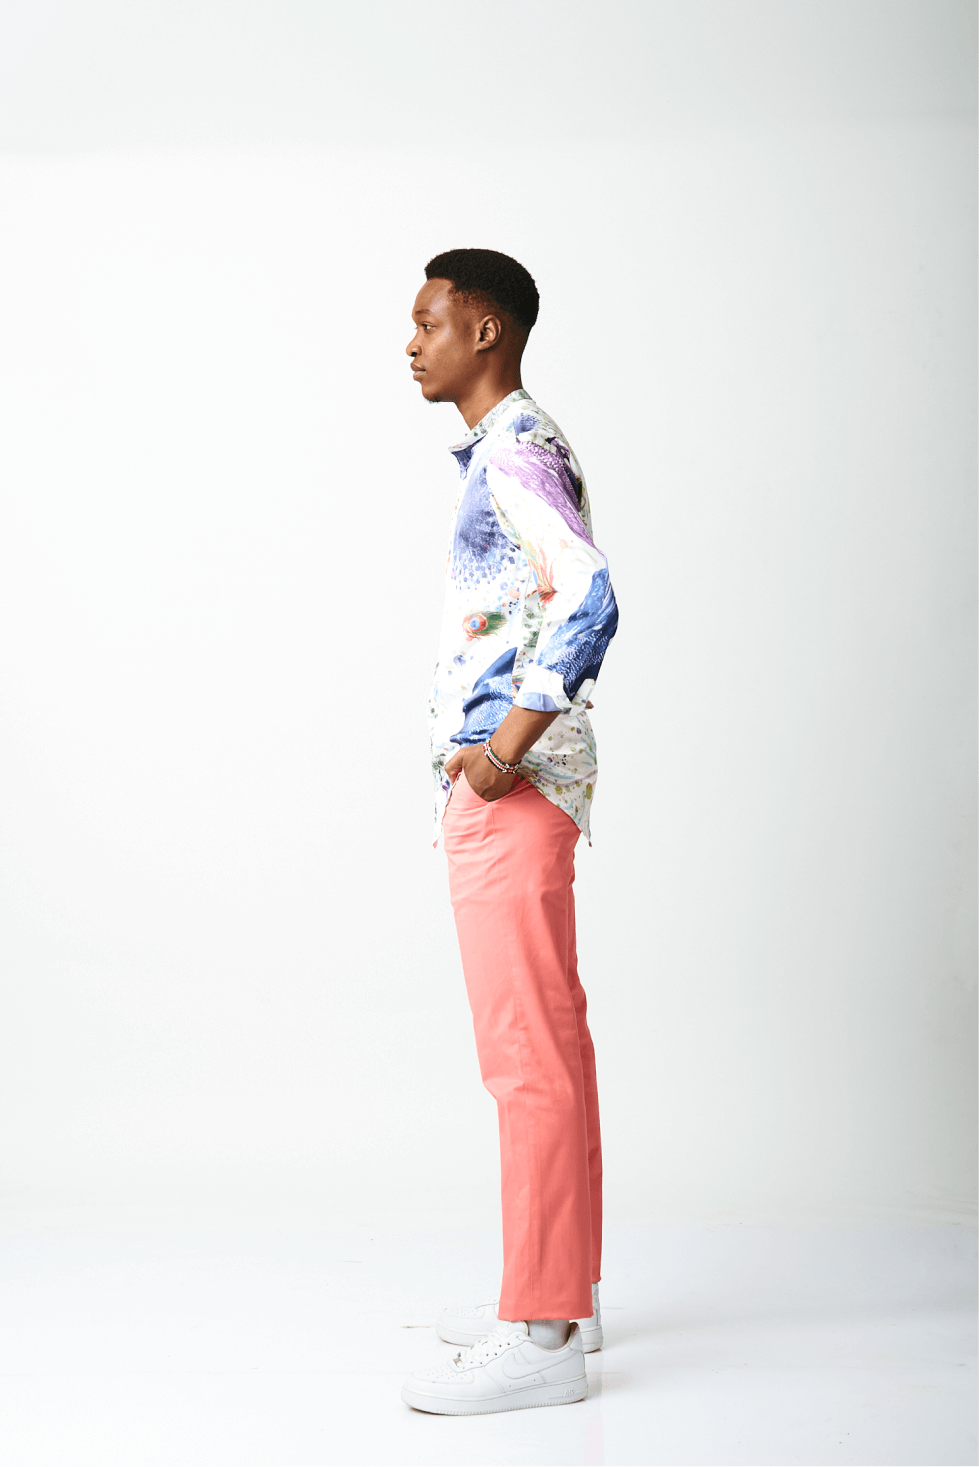 Shop Peacock Shirt by Genteel on Arrai. Discover stylish, affordable clothing, jewelry, handbags and unique handmade pieces from top Kenyan & African fashion brands prioritising sustainability and quality craftsmanship.